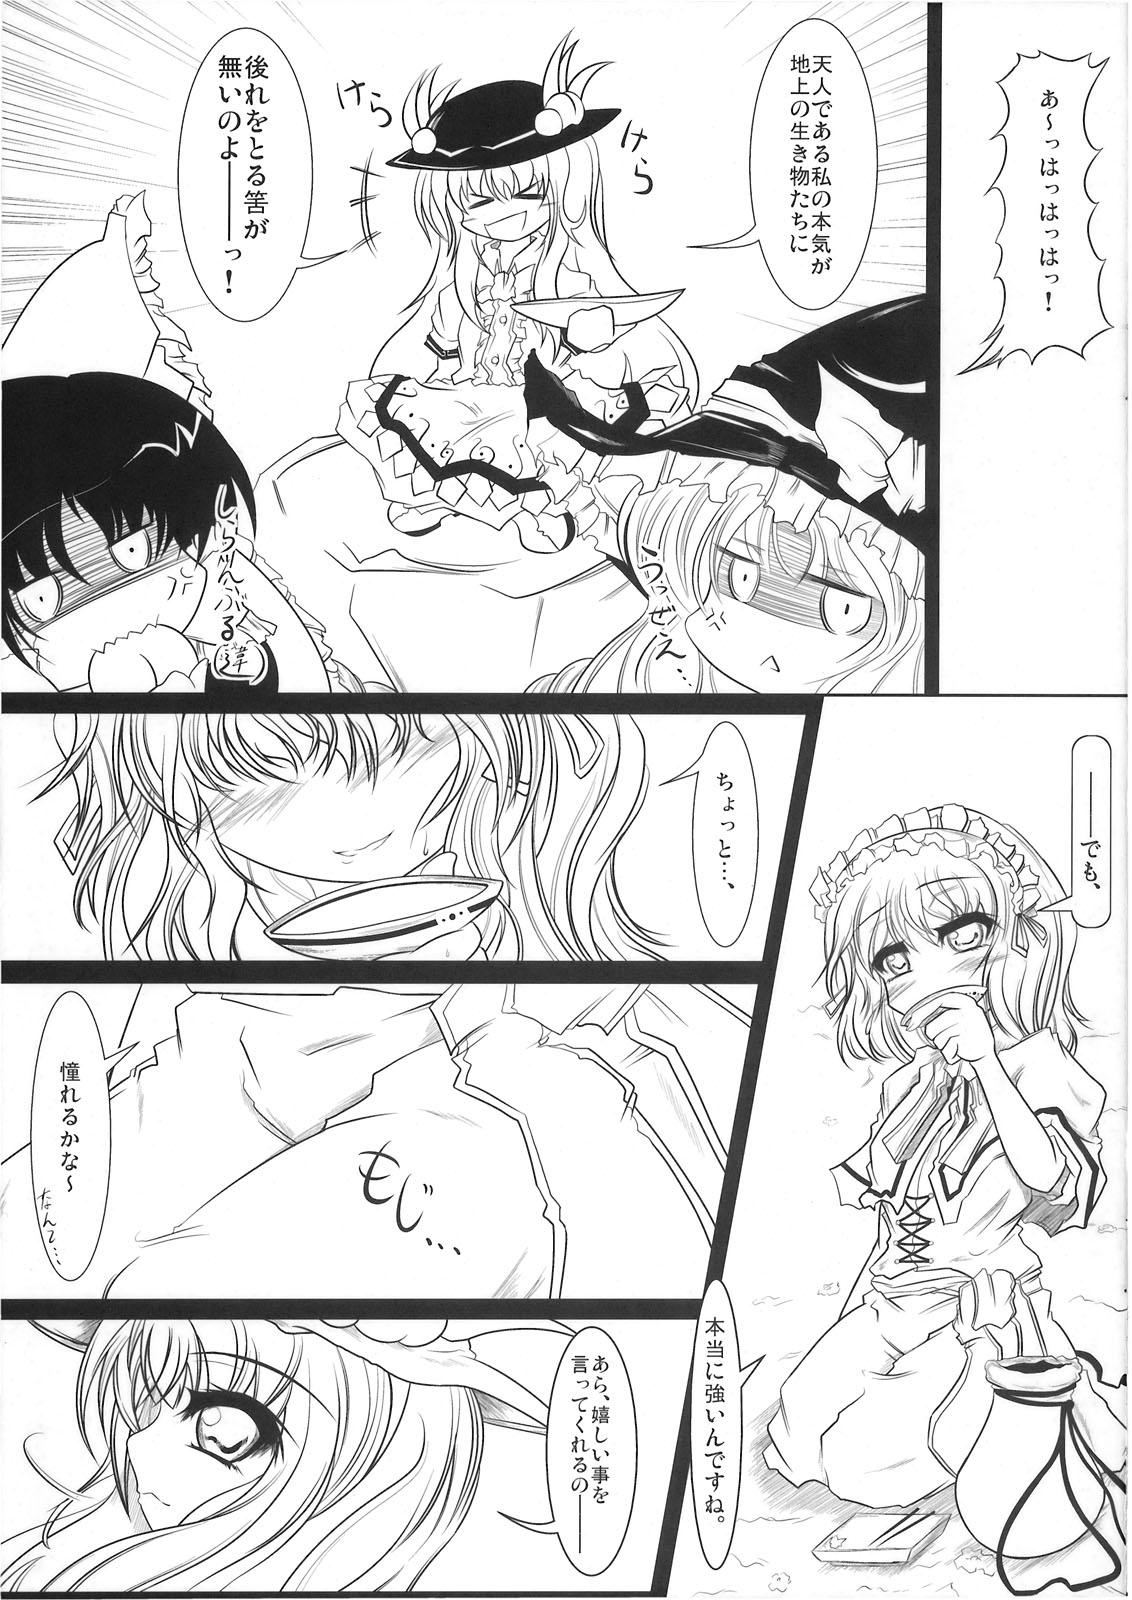 Tattoos ぴた天 - Touhou project Gays - Page 5